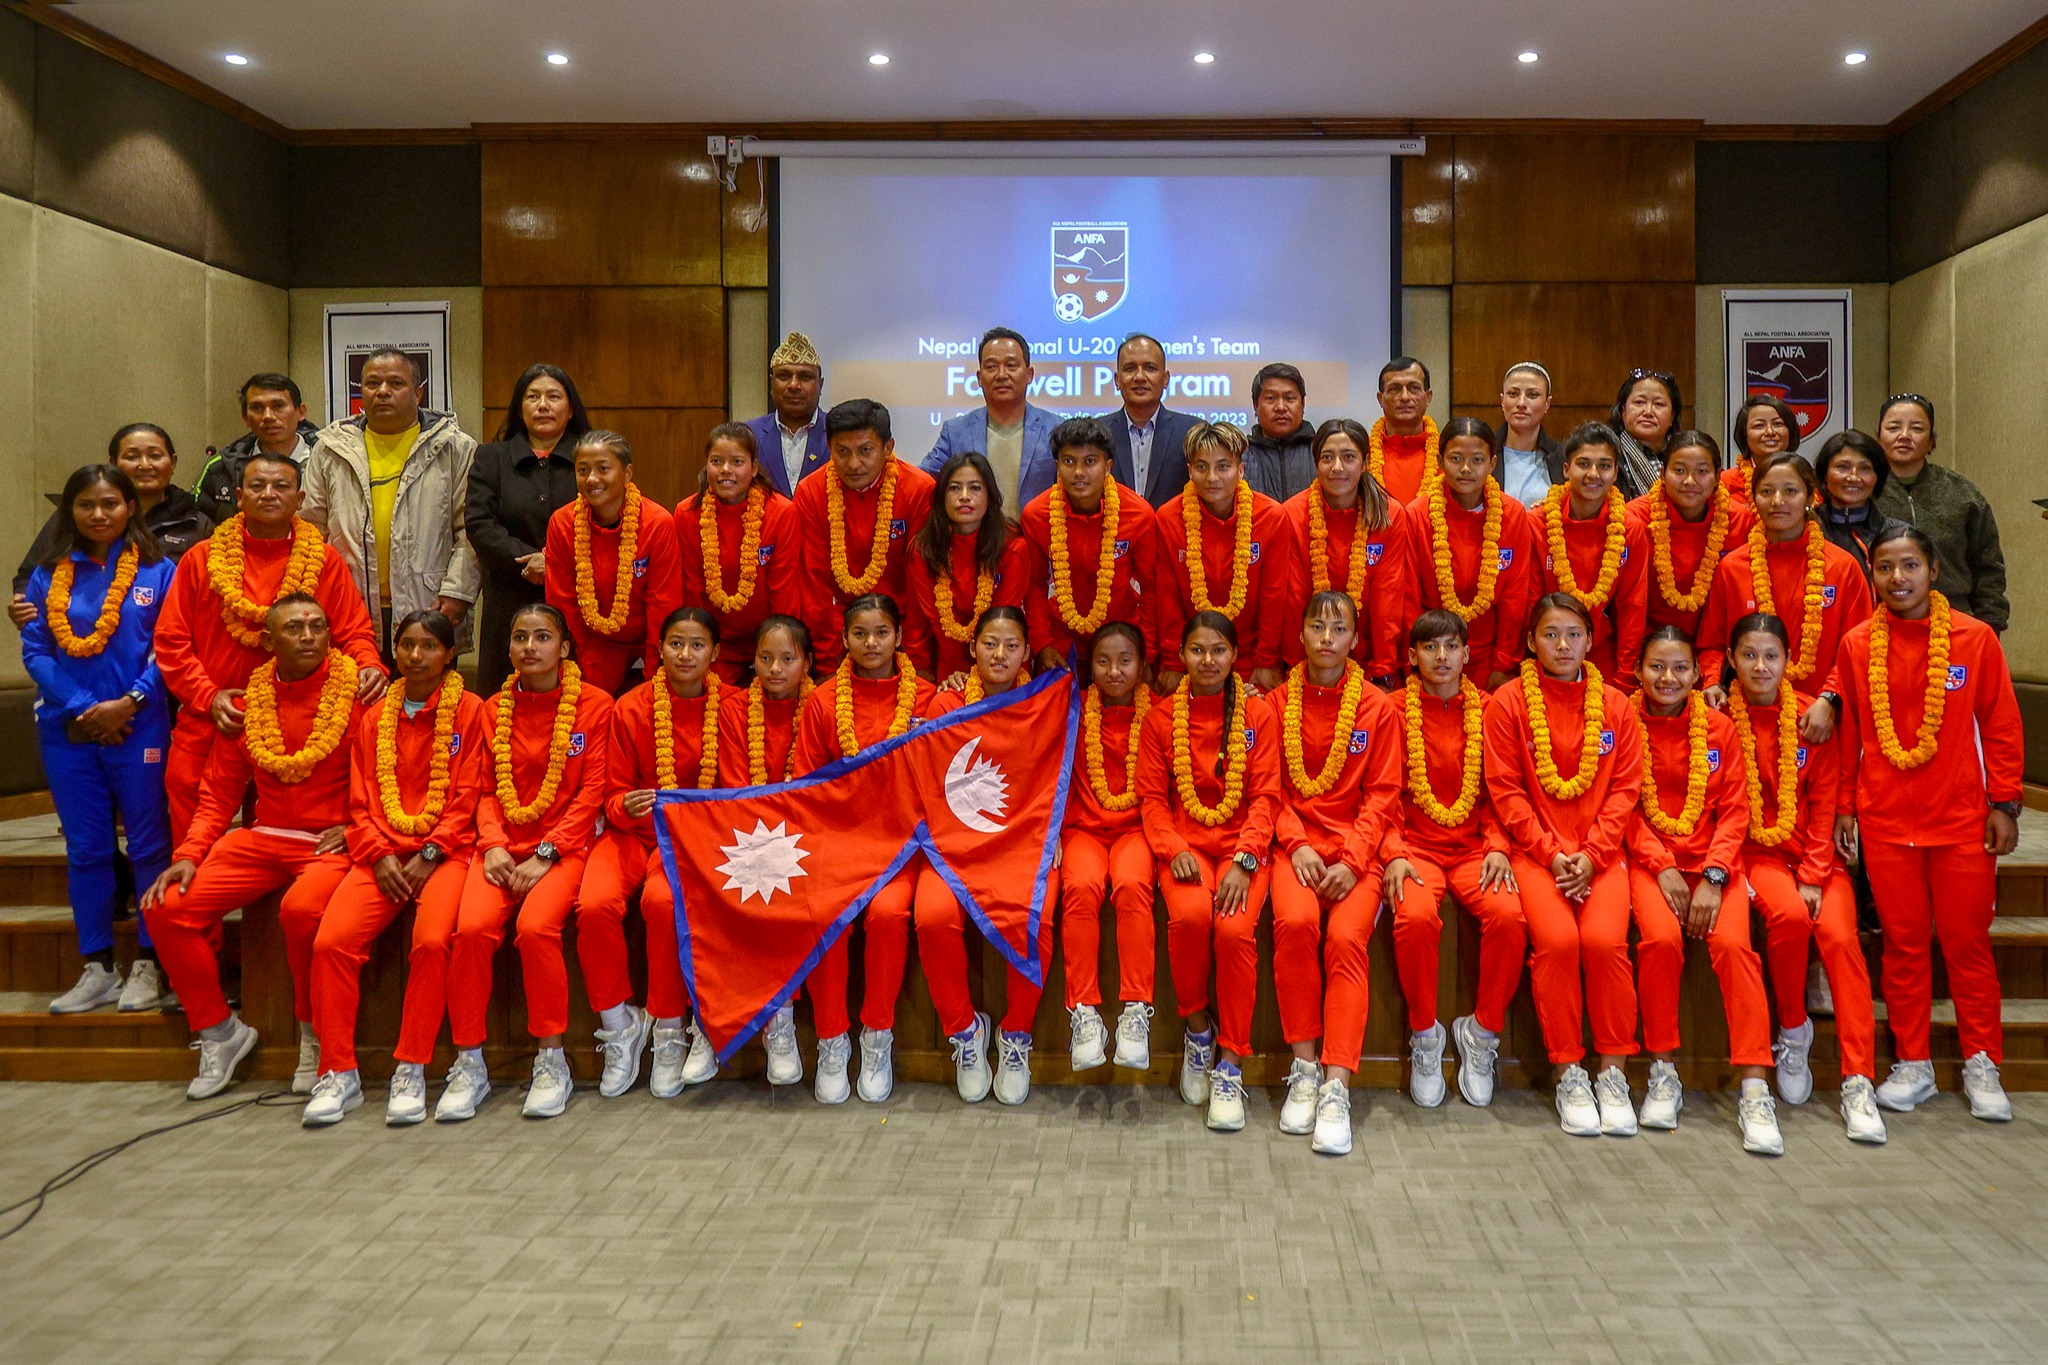 Nepal thrashes India by 3-1 in SAFF U-20 Women's Championship football match